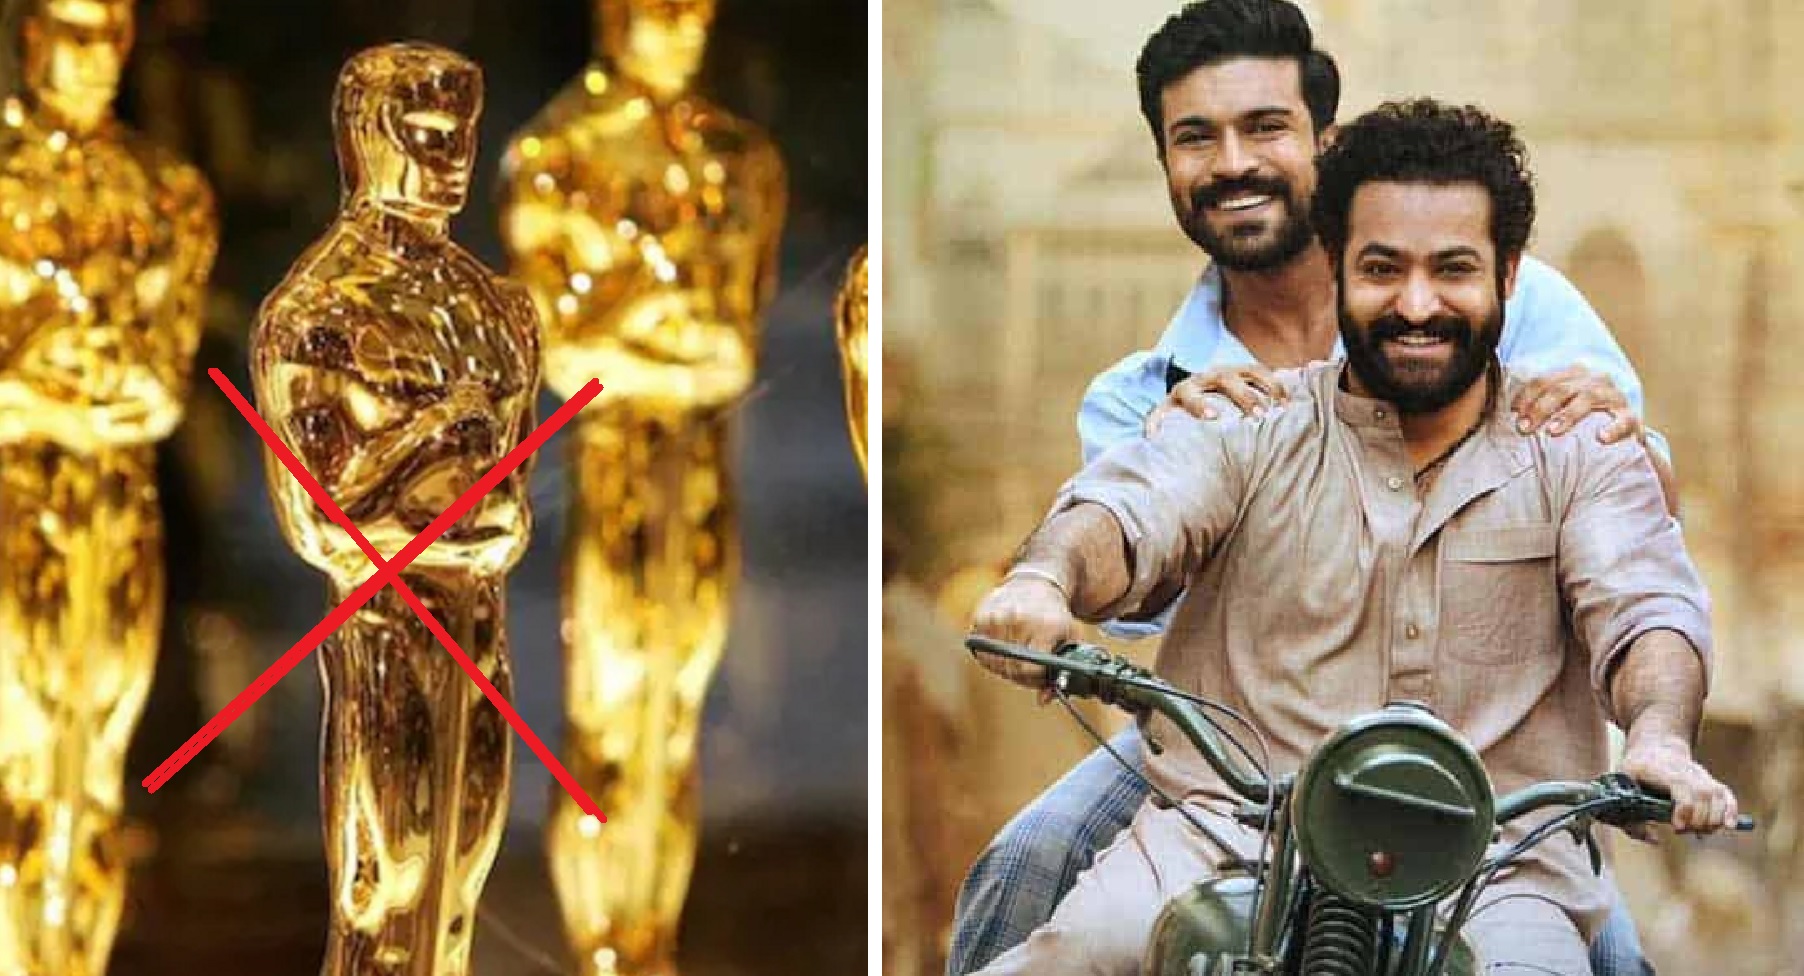 RRR Snubbed At The Oscars: SS Rajamouli’s Film Not Nominated For ‘Best Picture’ After All The Hype